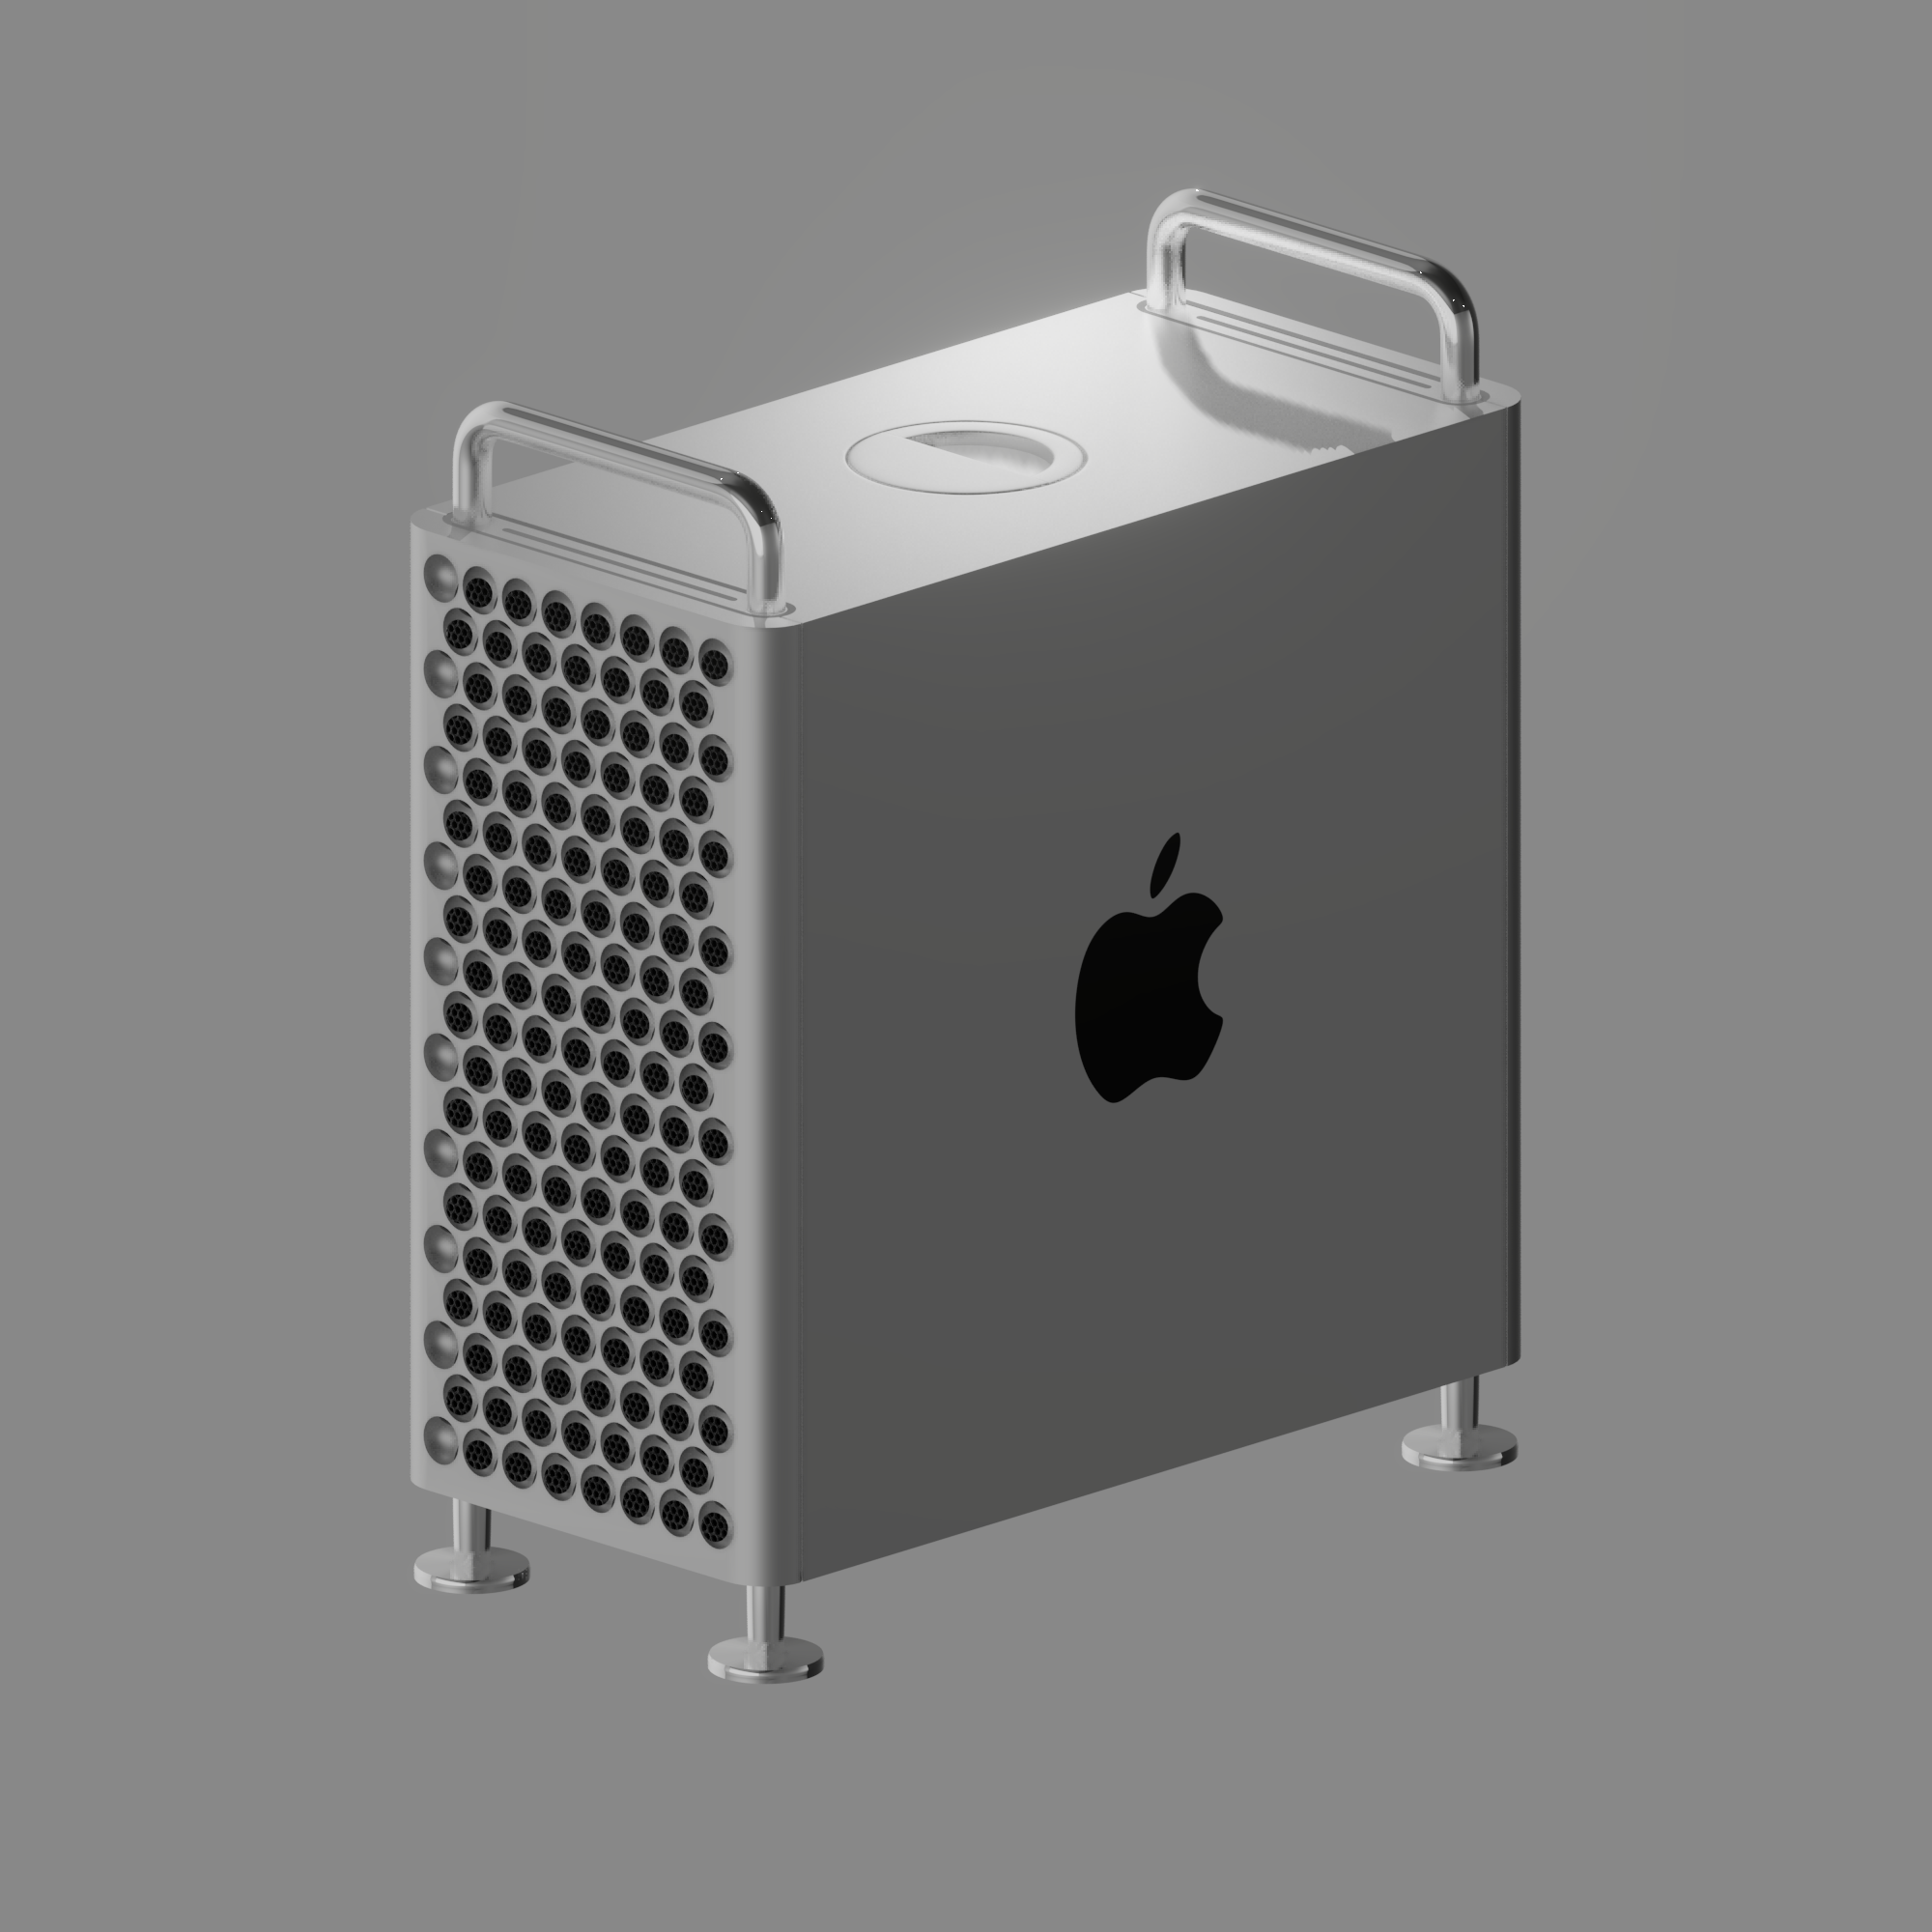 Mac Pro 2020 & Apple Pro Display XDR preview image 5